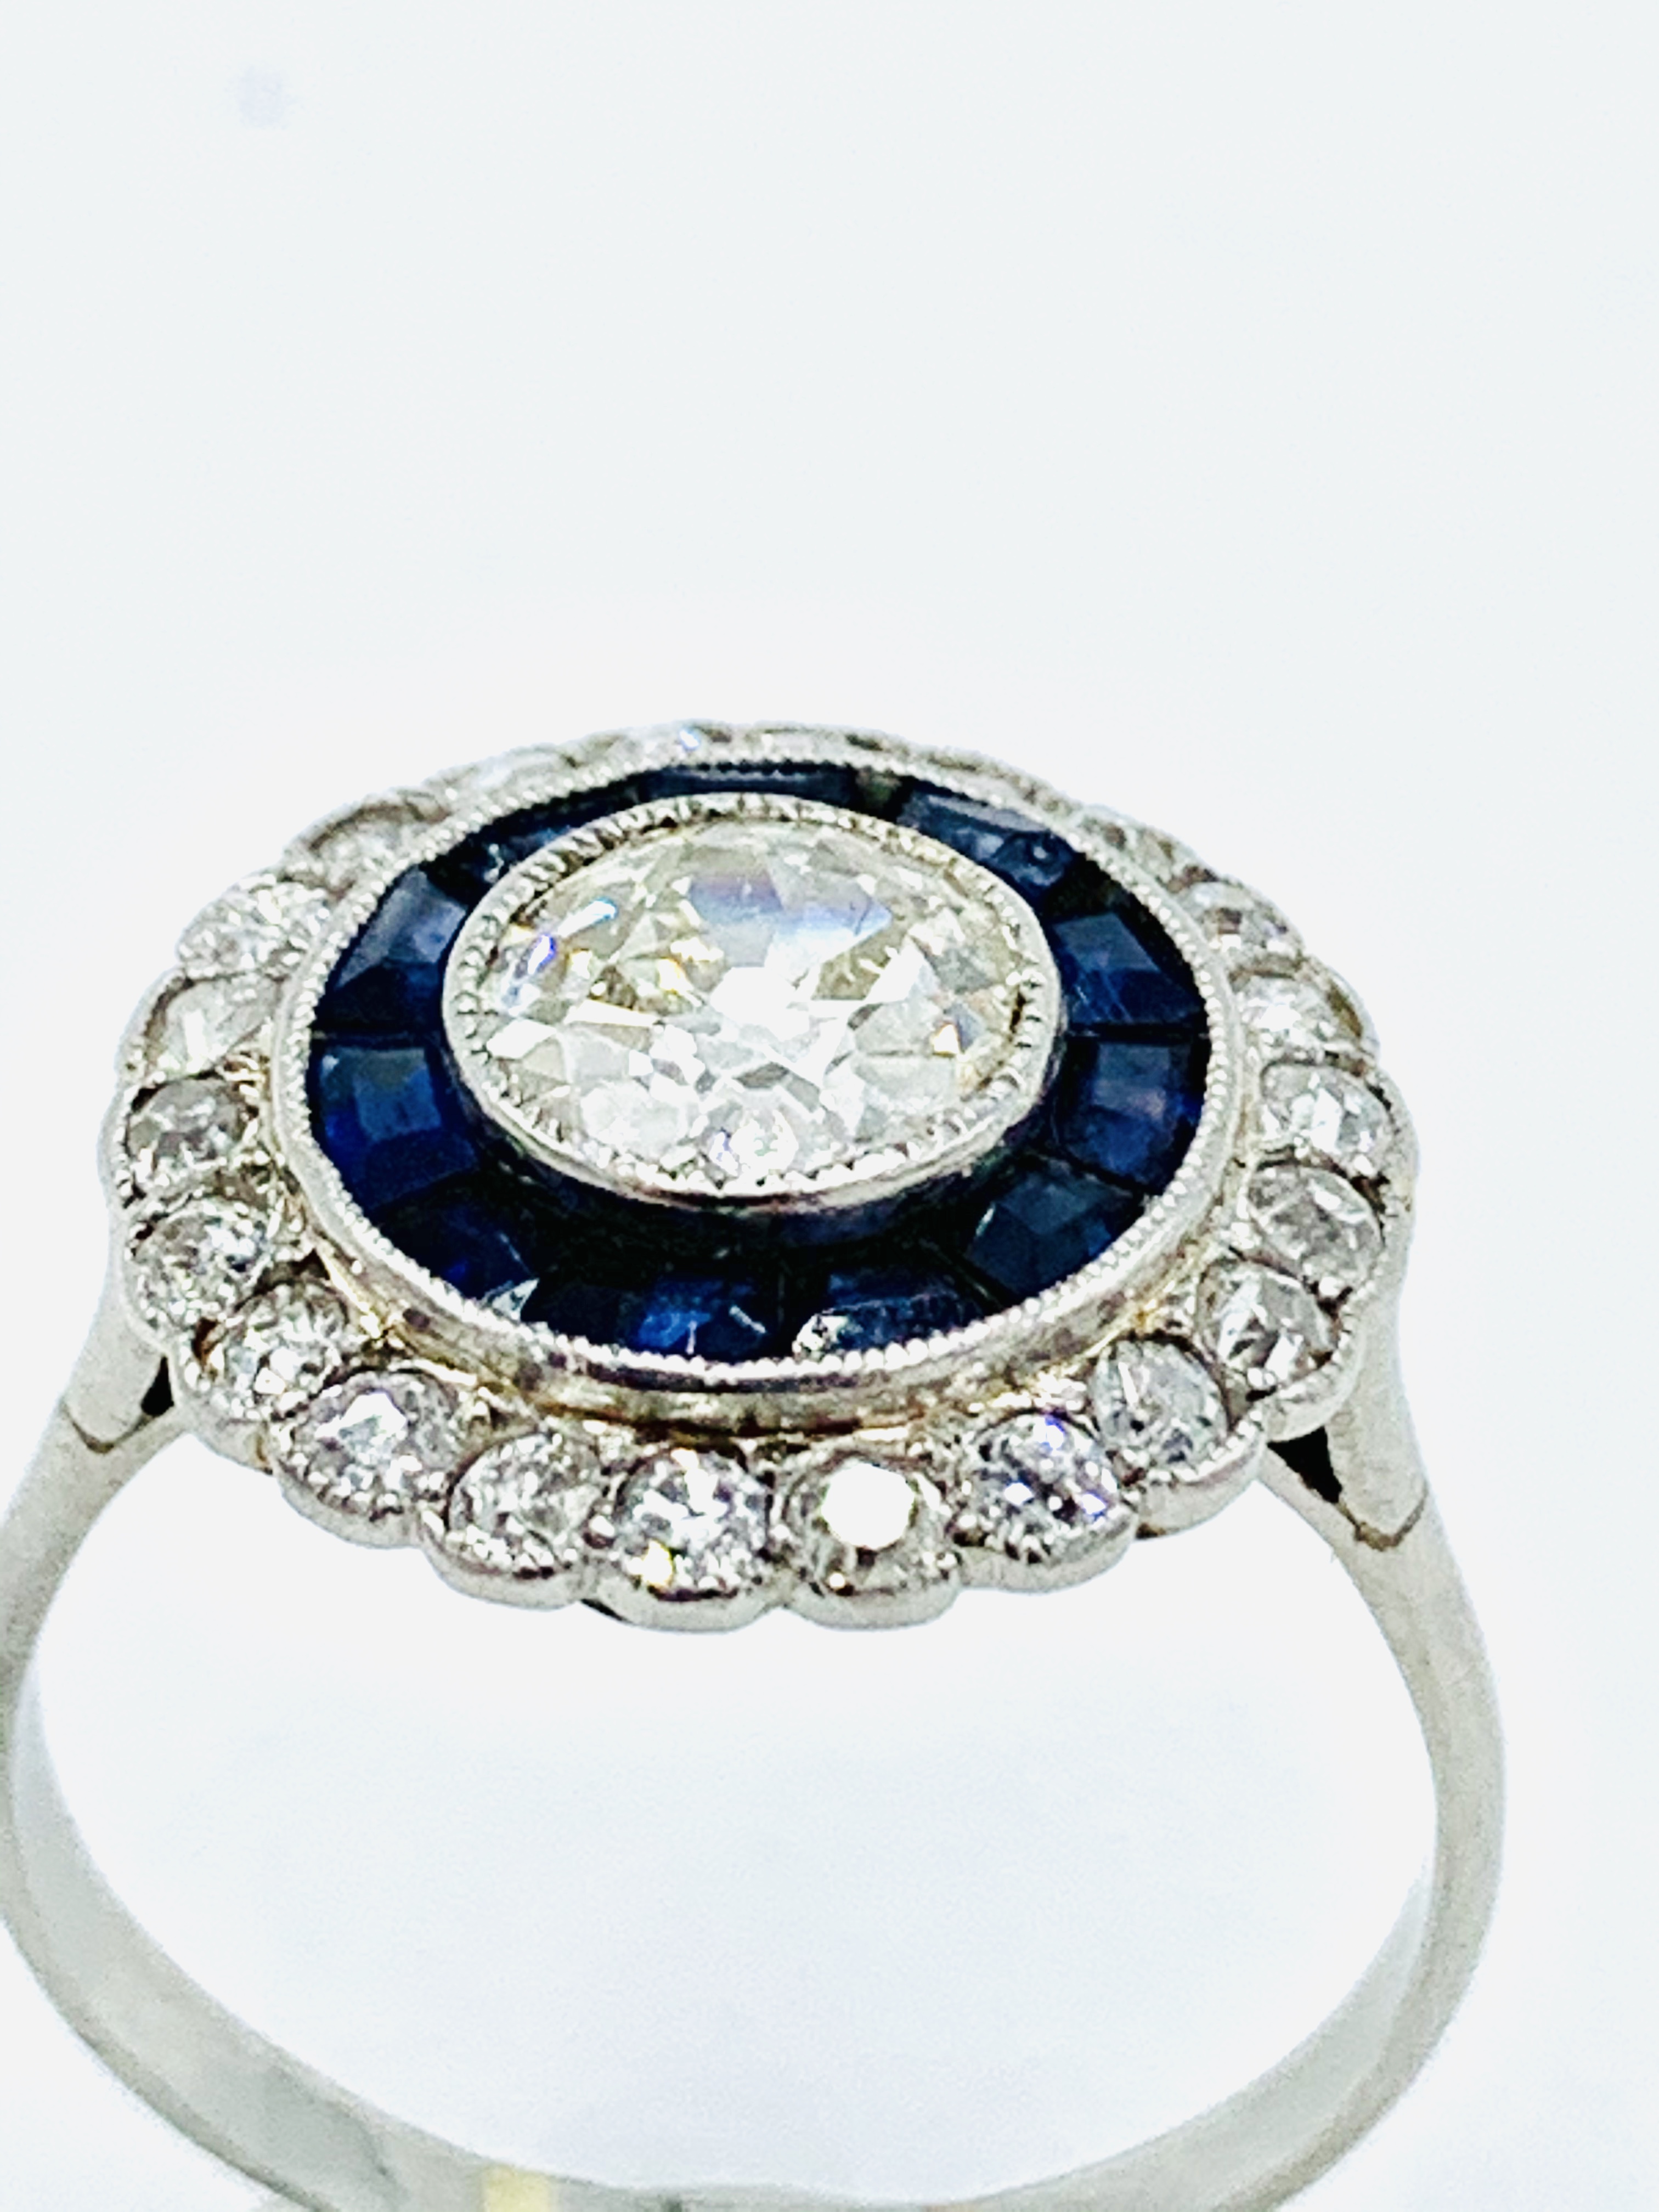 White gold, sapphire and diamond two row target ring. - Image 2 of 6